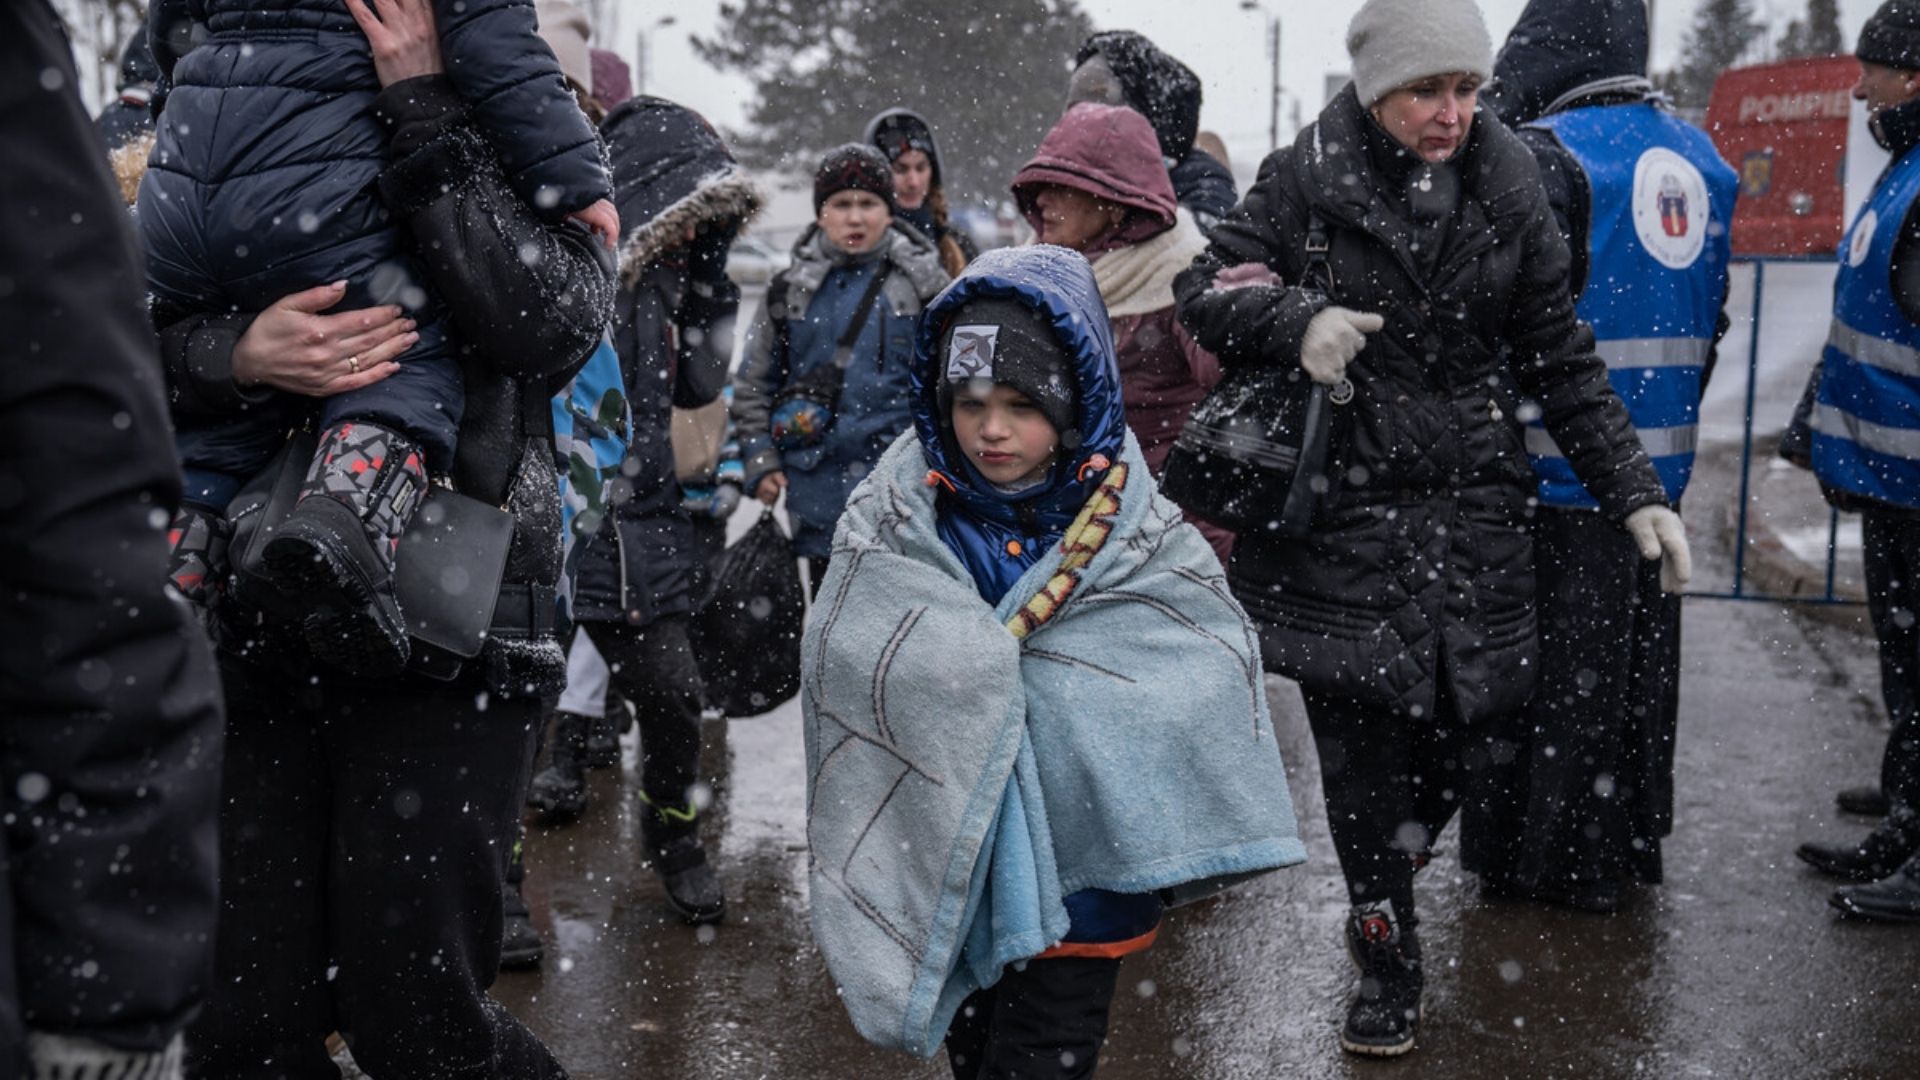 A child wrapped in blankets fighting his way through snowfall on the Ukraine-Romania border